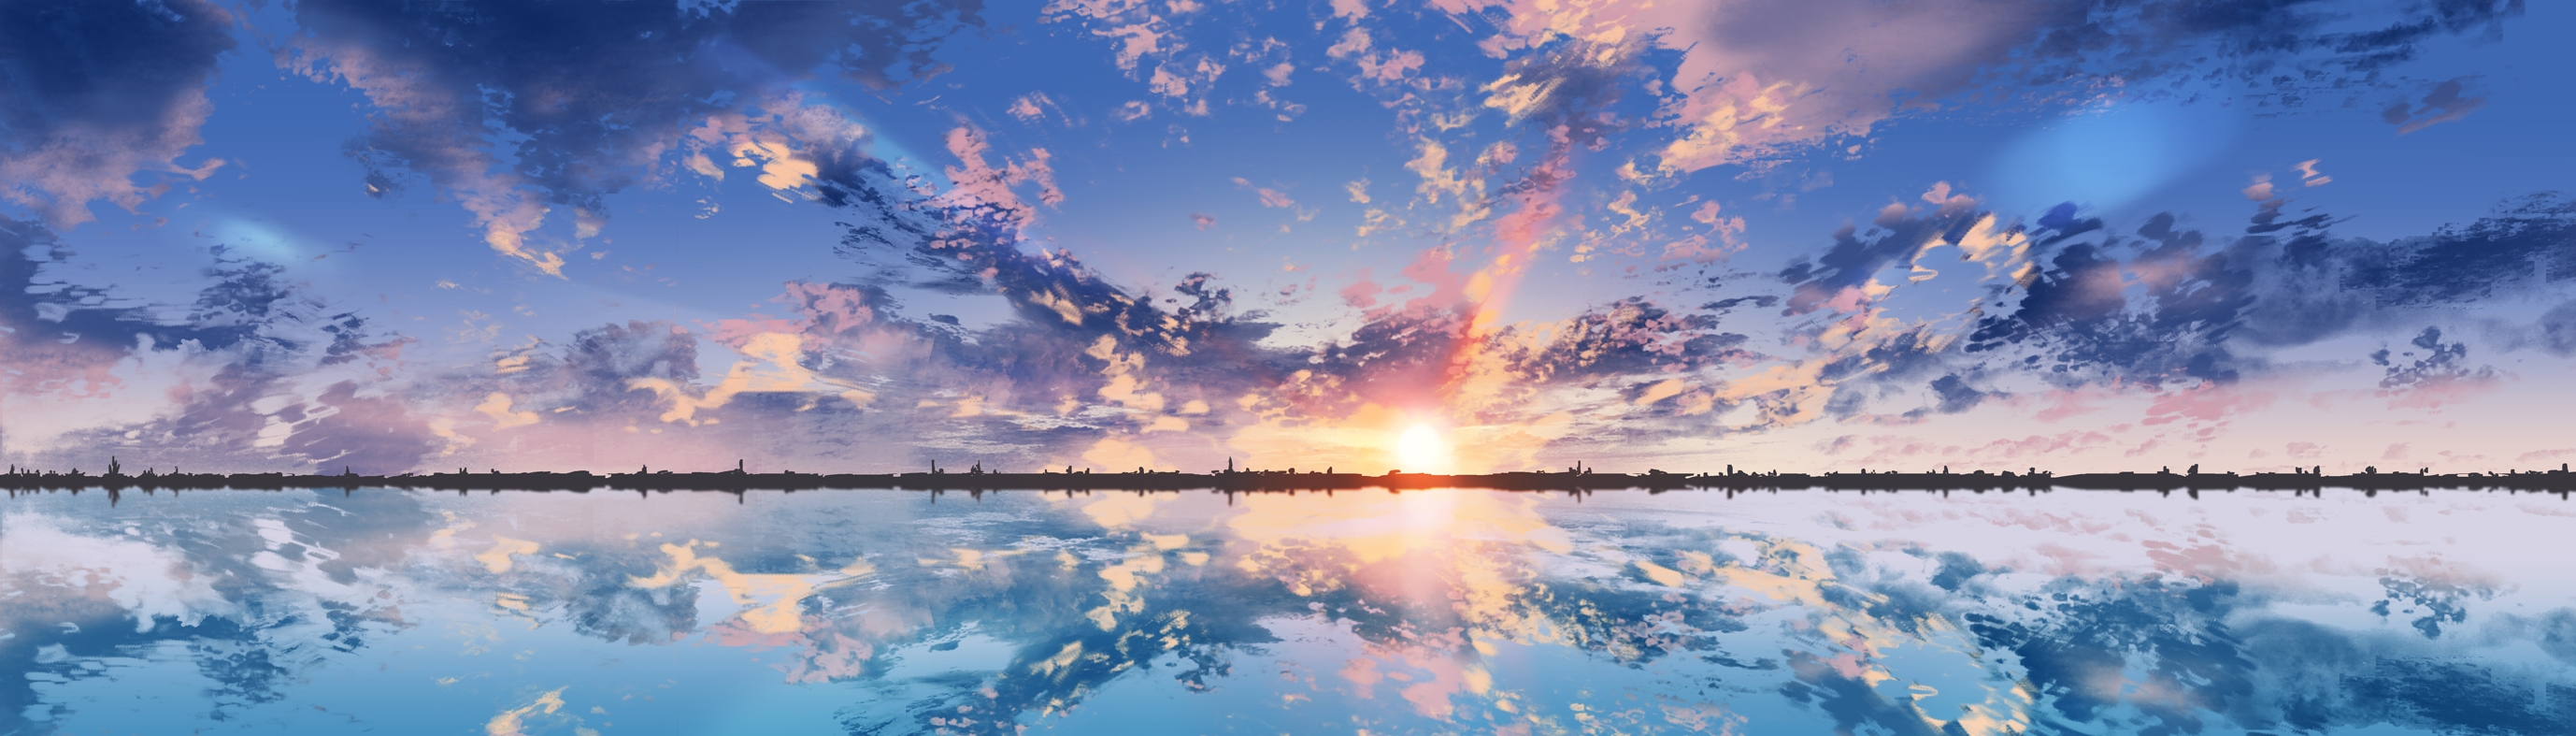 Anime Scenic, Clouds, Sunset, Reflection, Dual Monitor